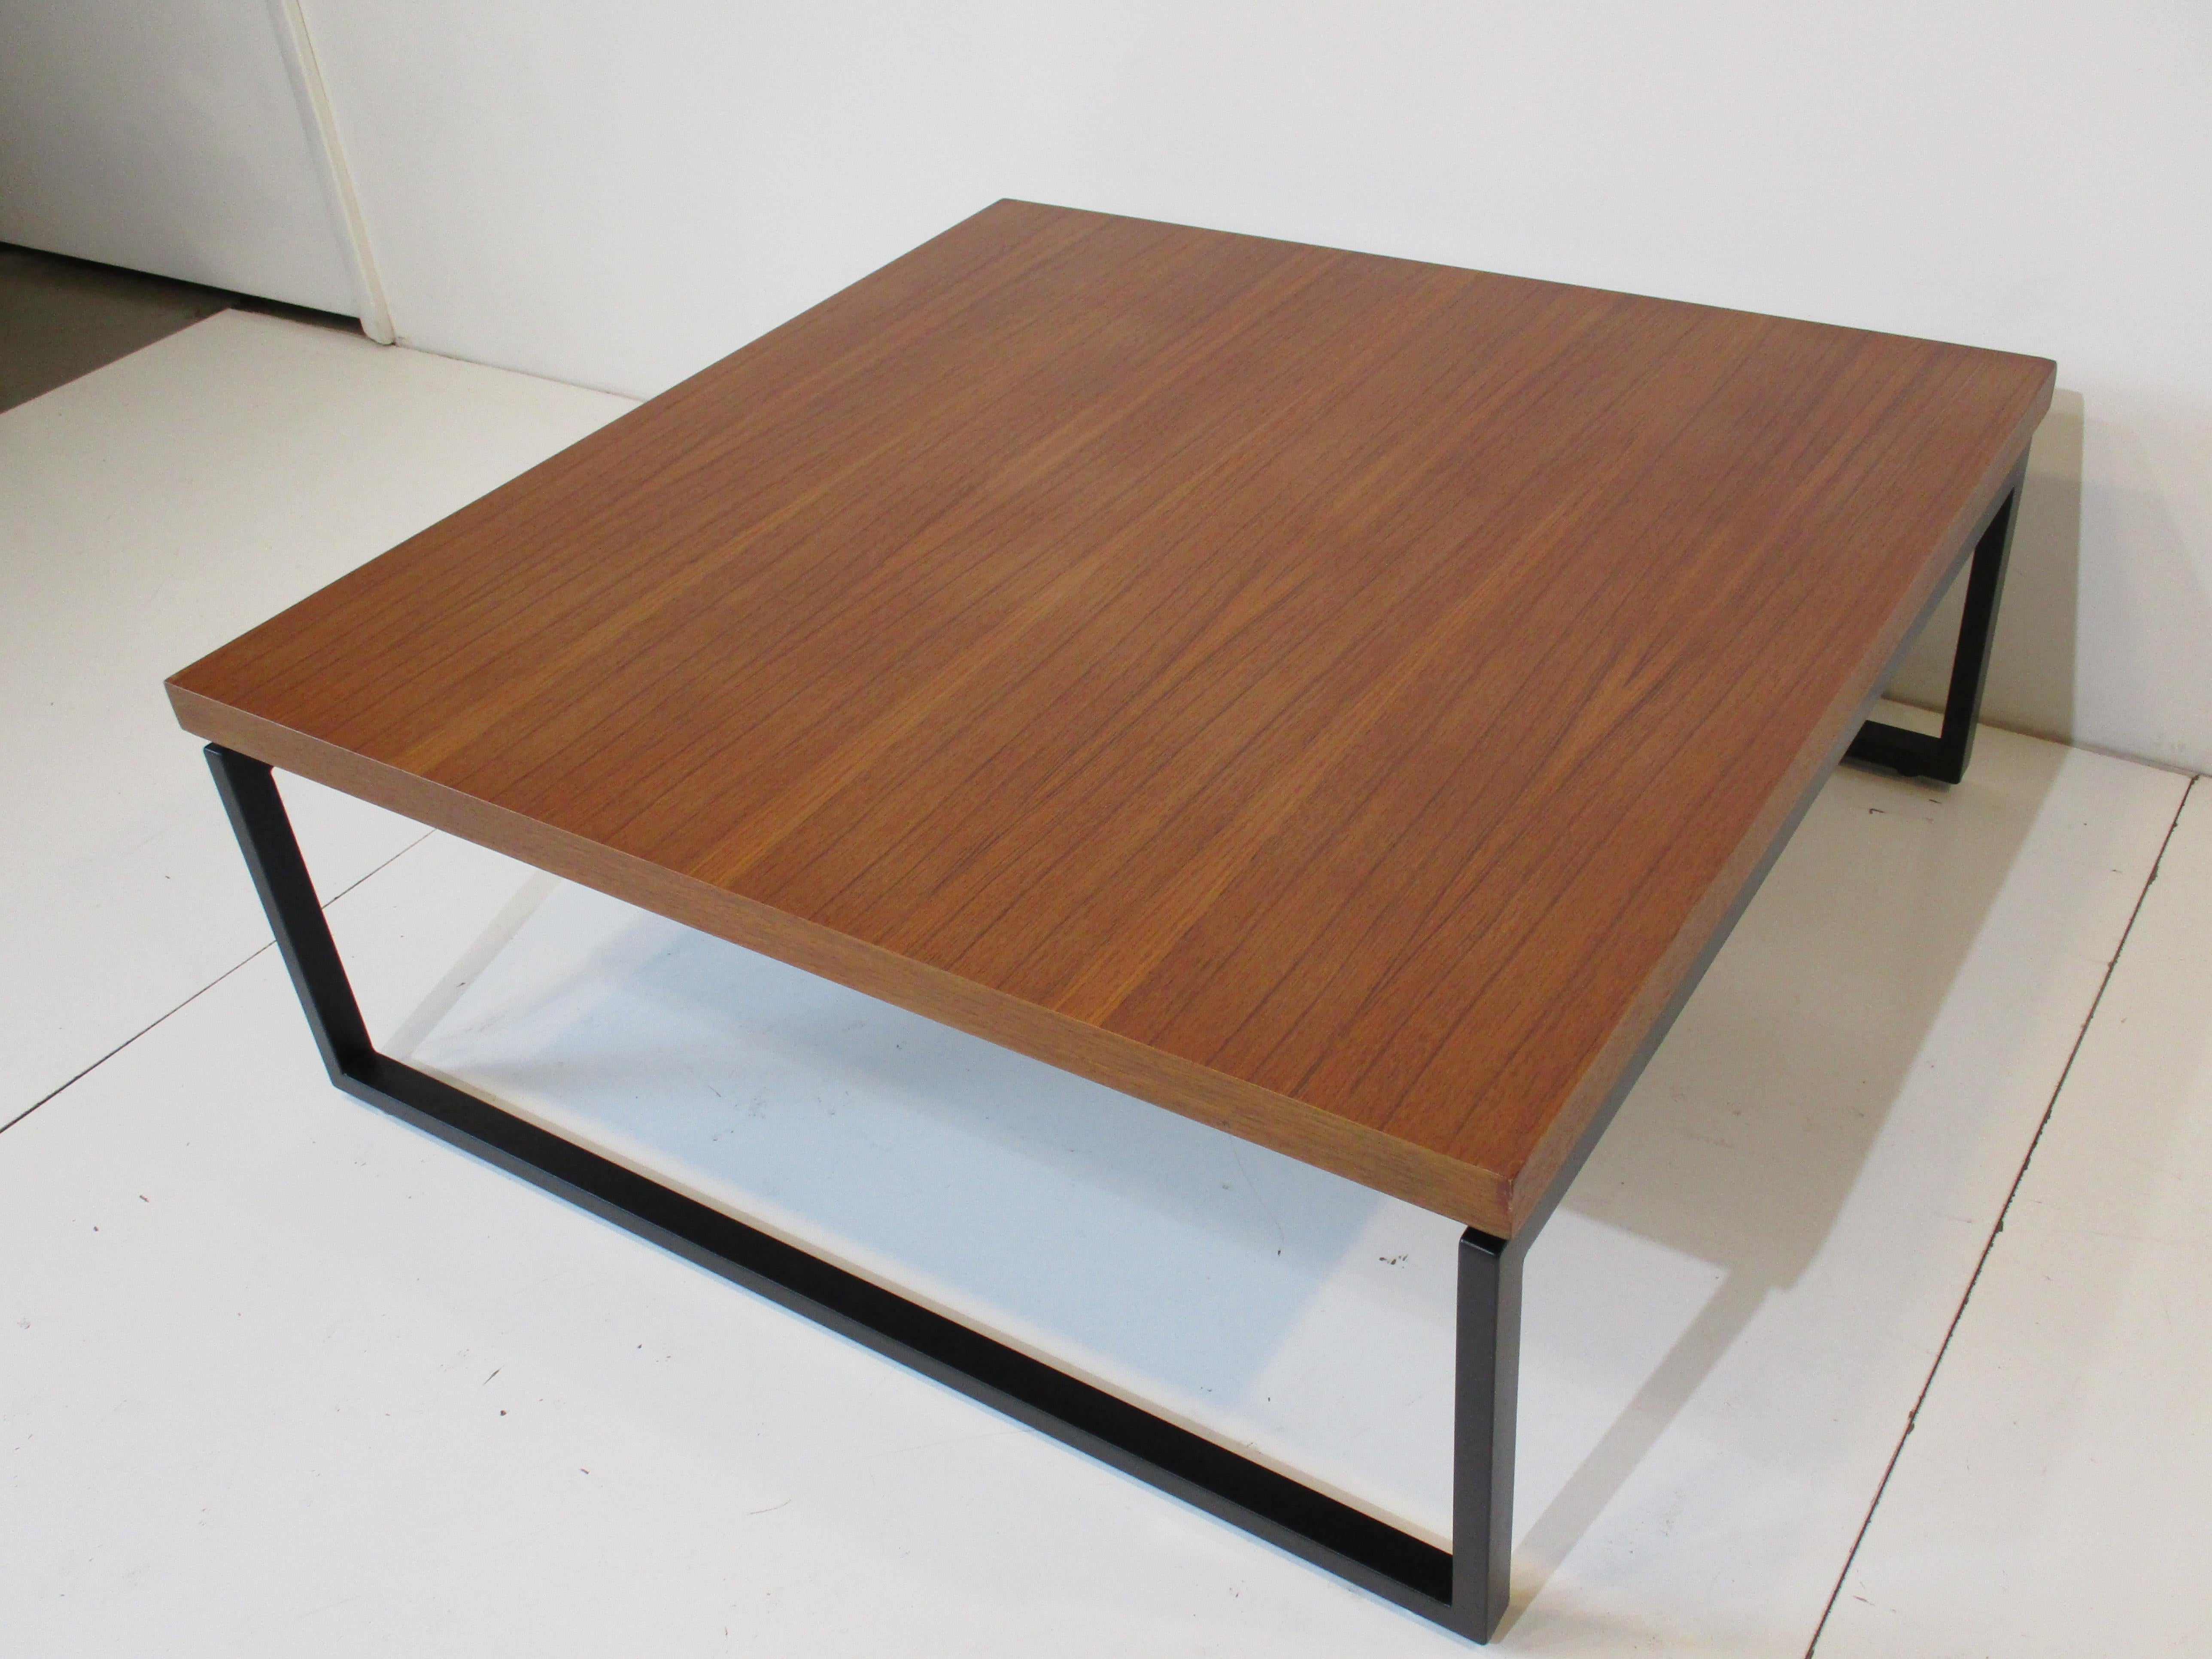 A very well grained Mid Century coffee table in a medium tone Indonesian mahogany with nickeled spacers to the legs making the top seem to float. The metal legs and frame are in satin black so the details to the table give it a rich and